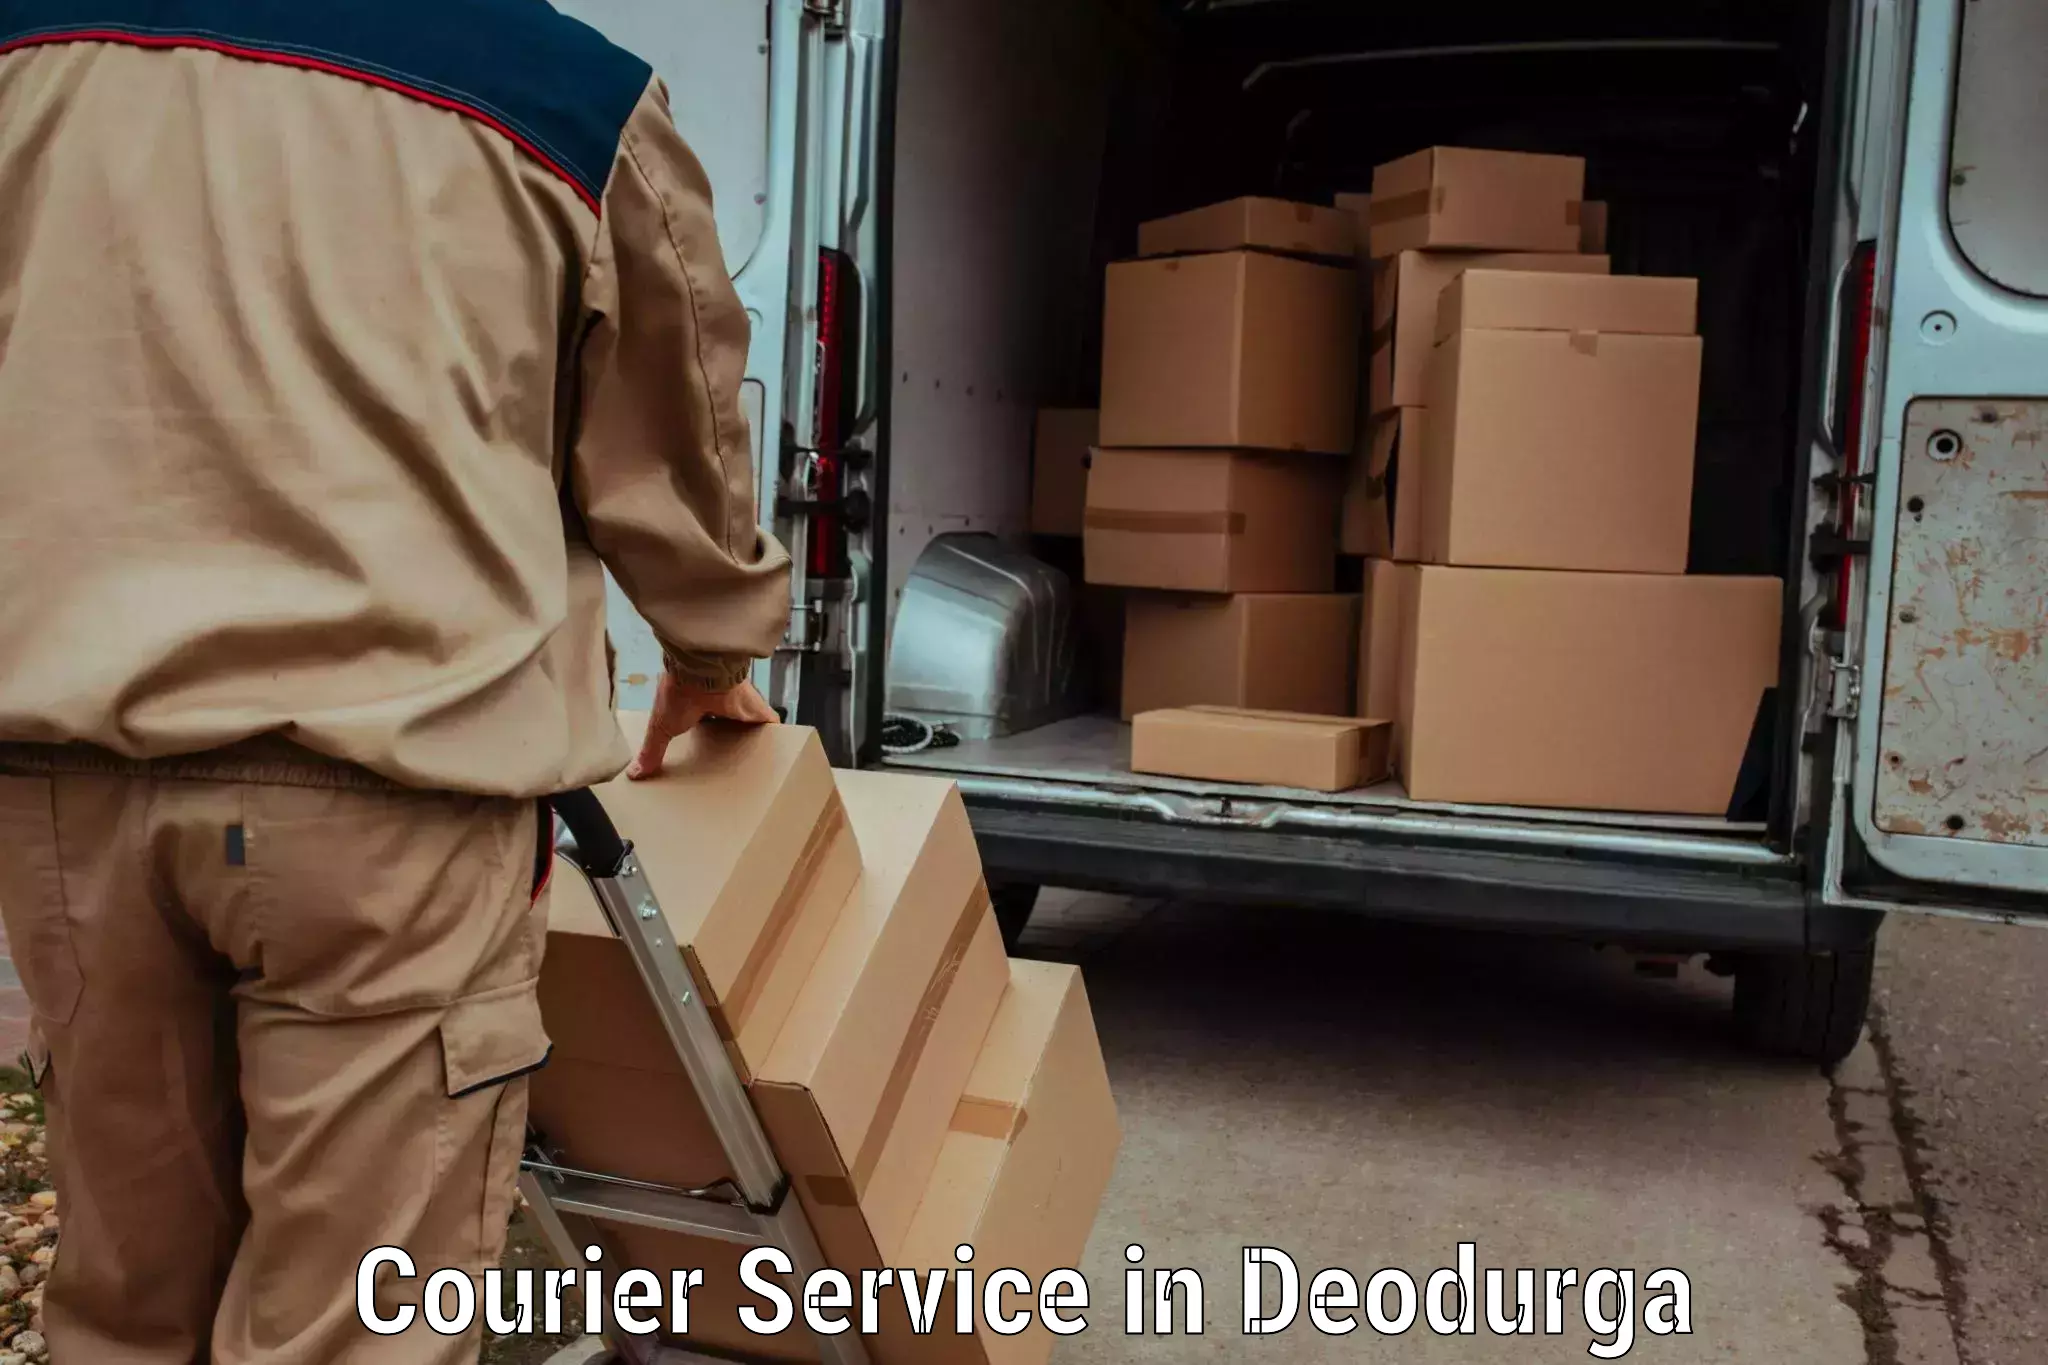 Courier dispatch services in Deodurga